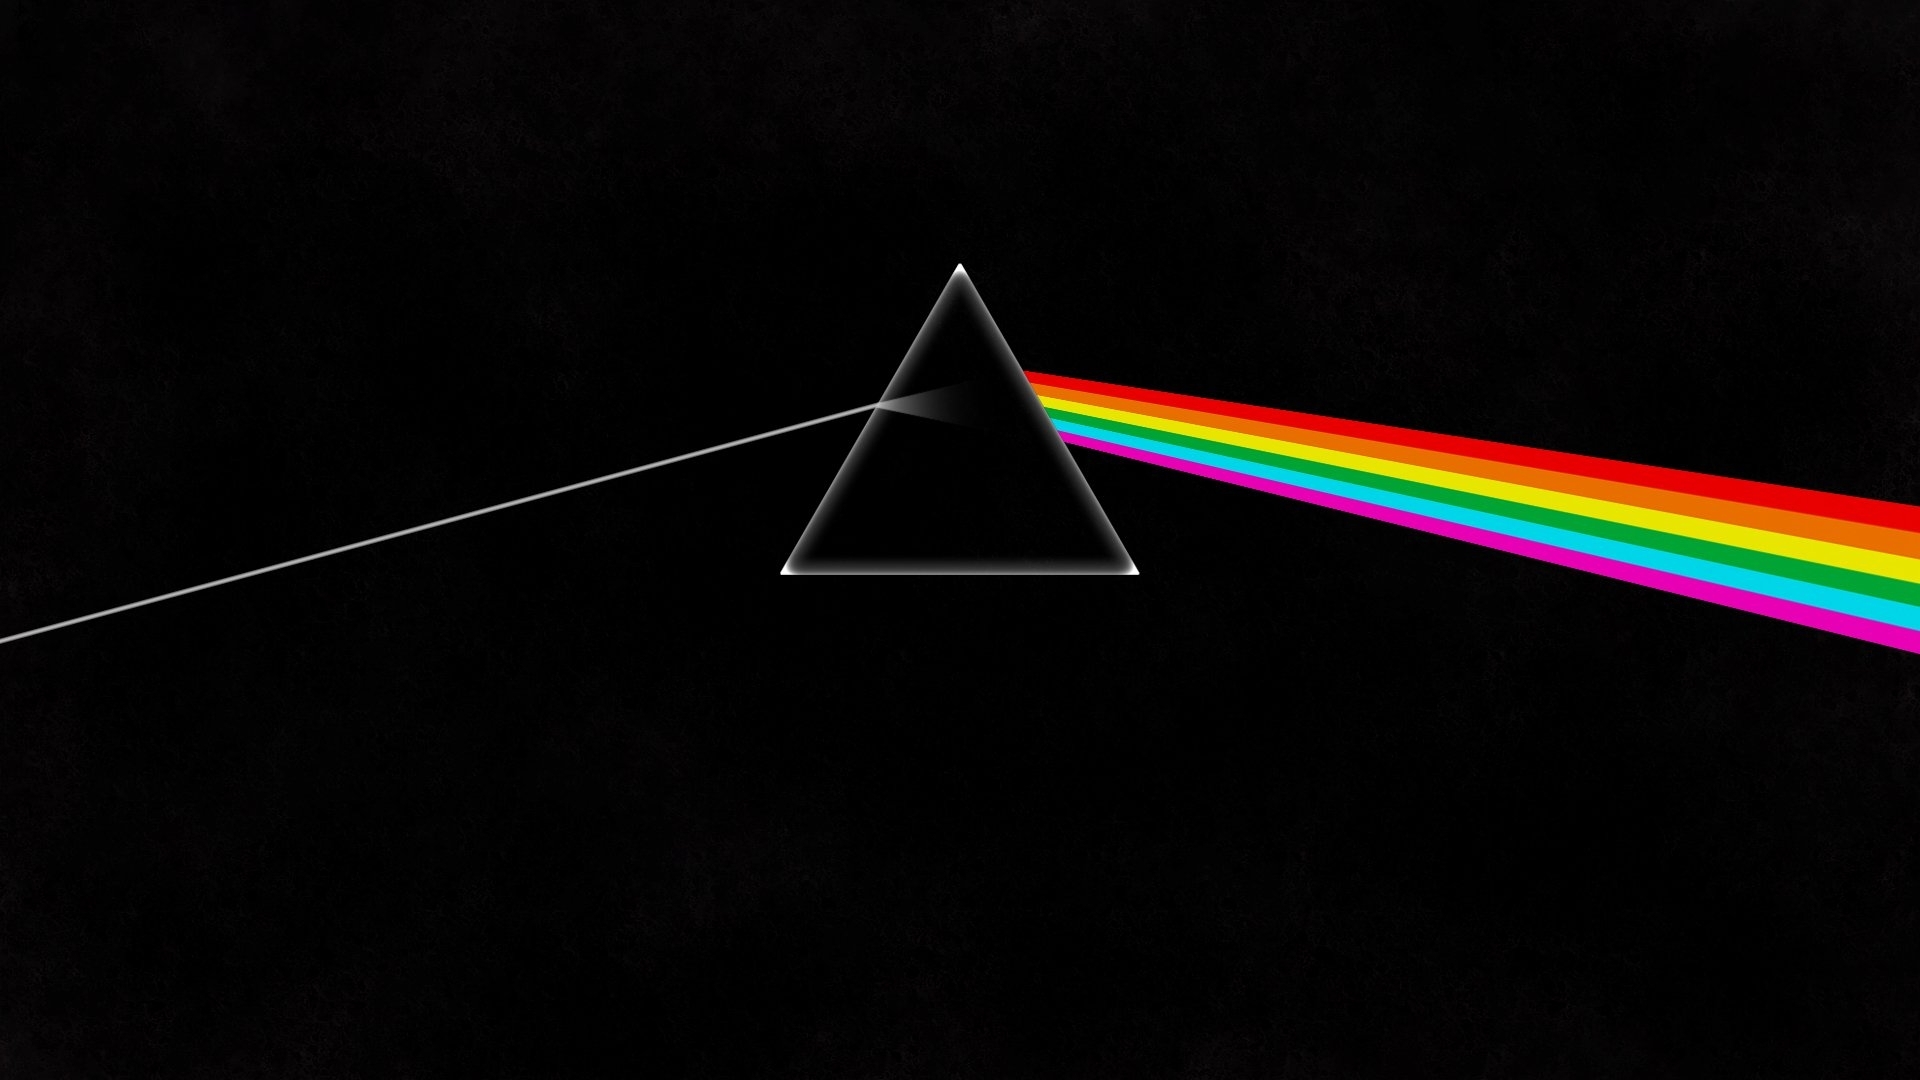 10 Most Popular Pink Floyd Wall Paper FULL HD 1080p For PC Background